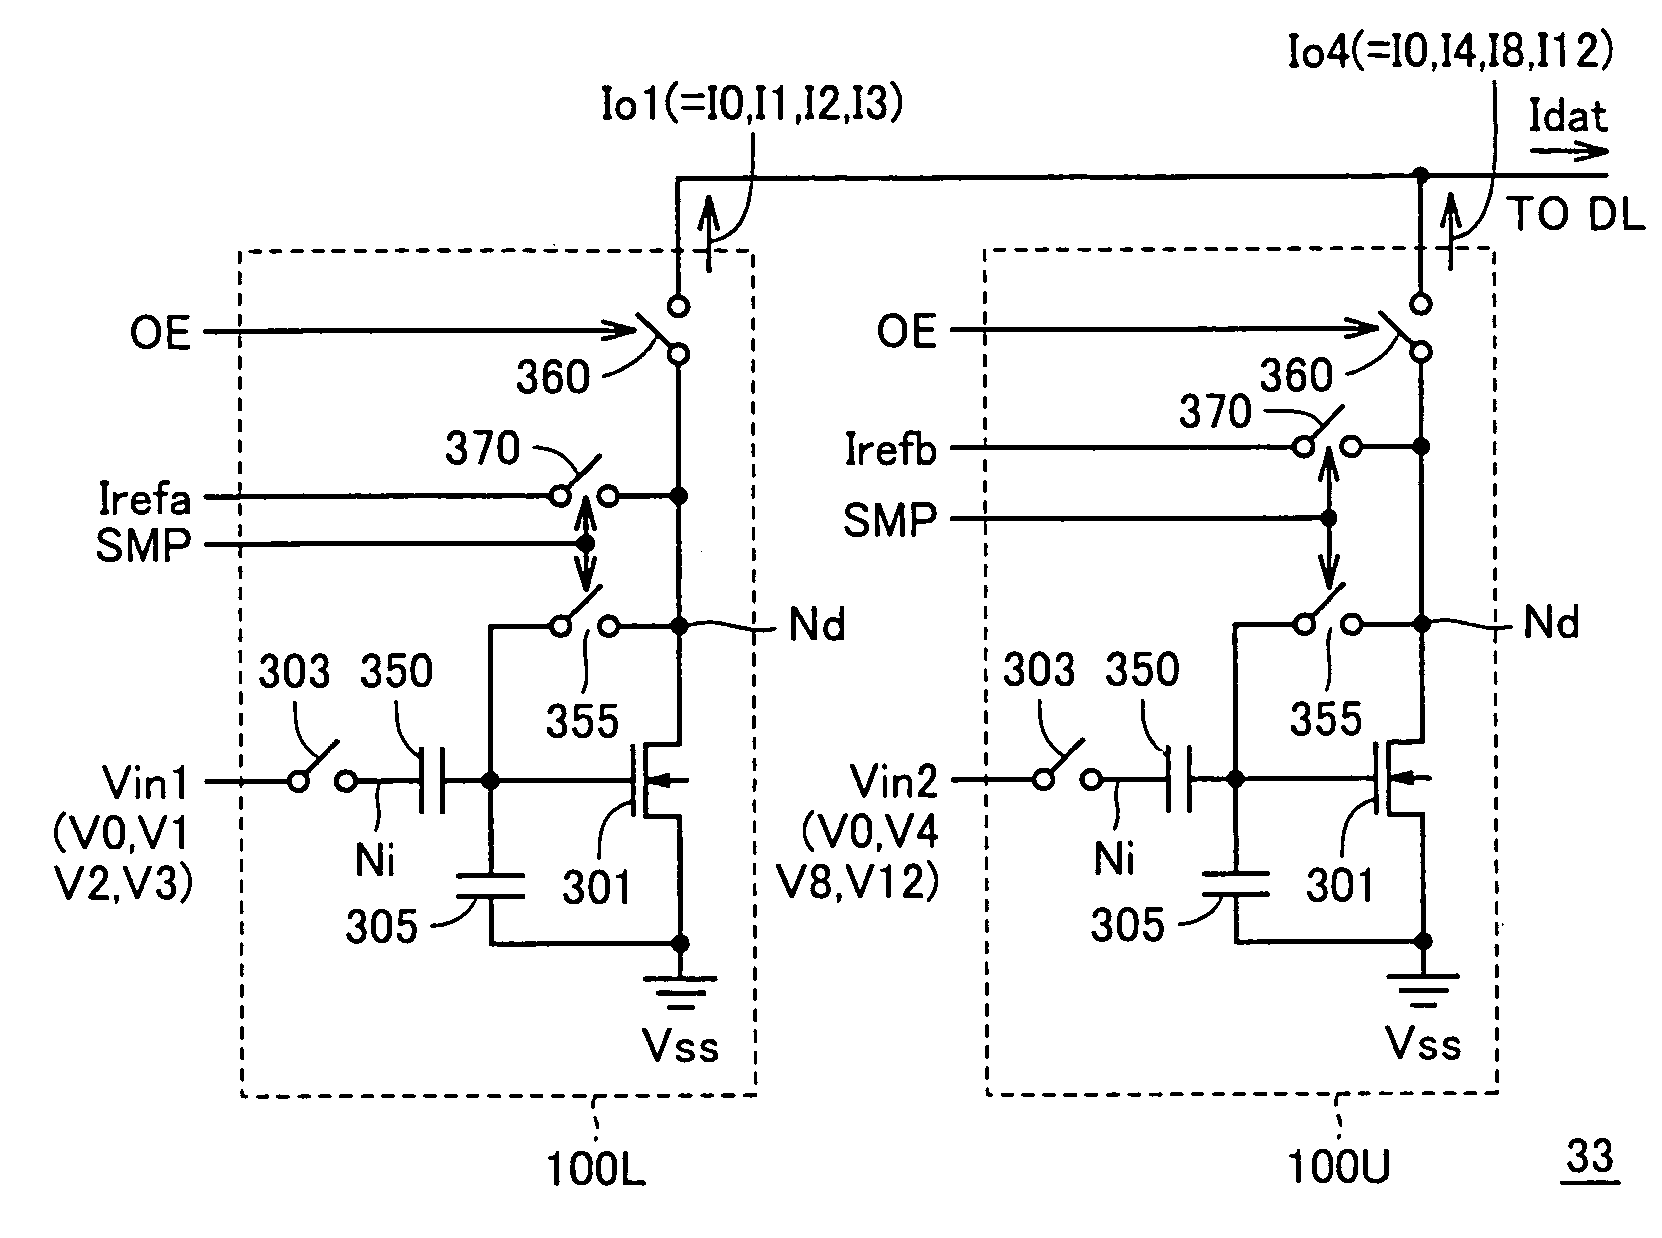 Display device with light emitting elements